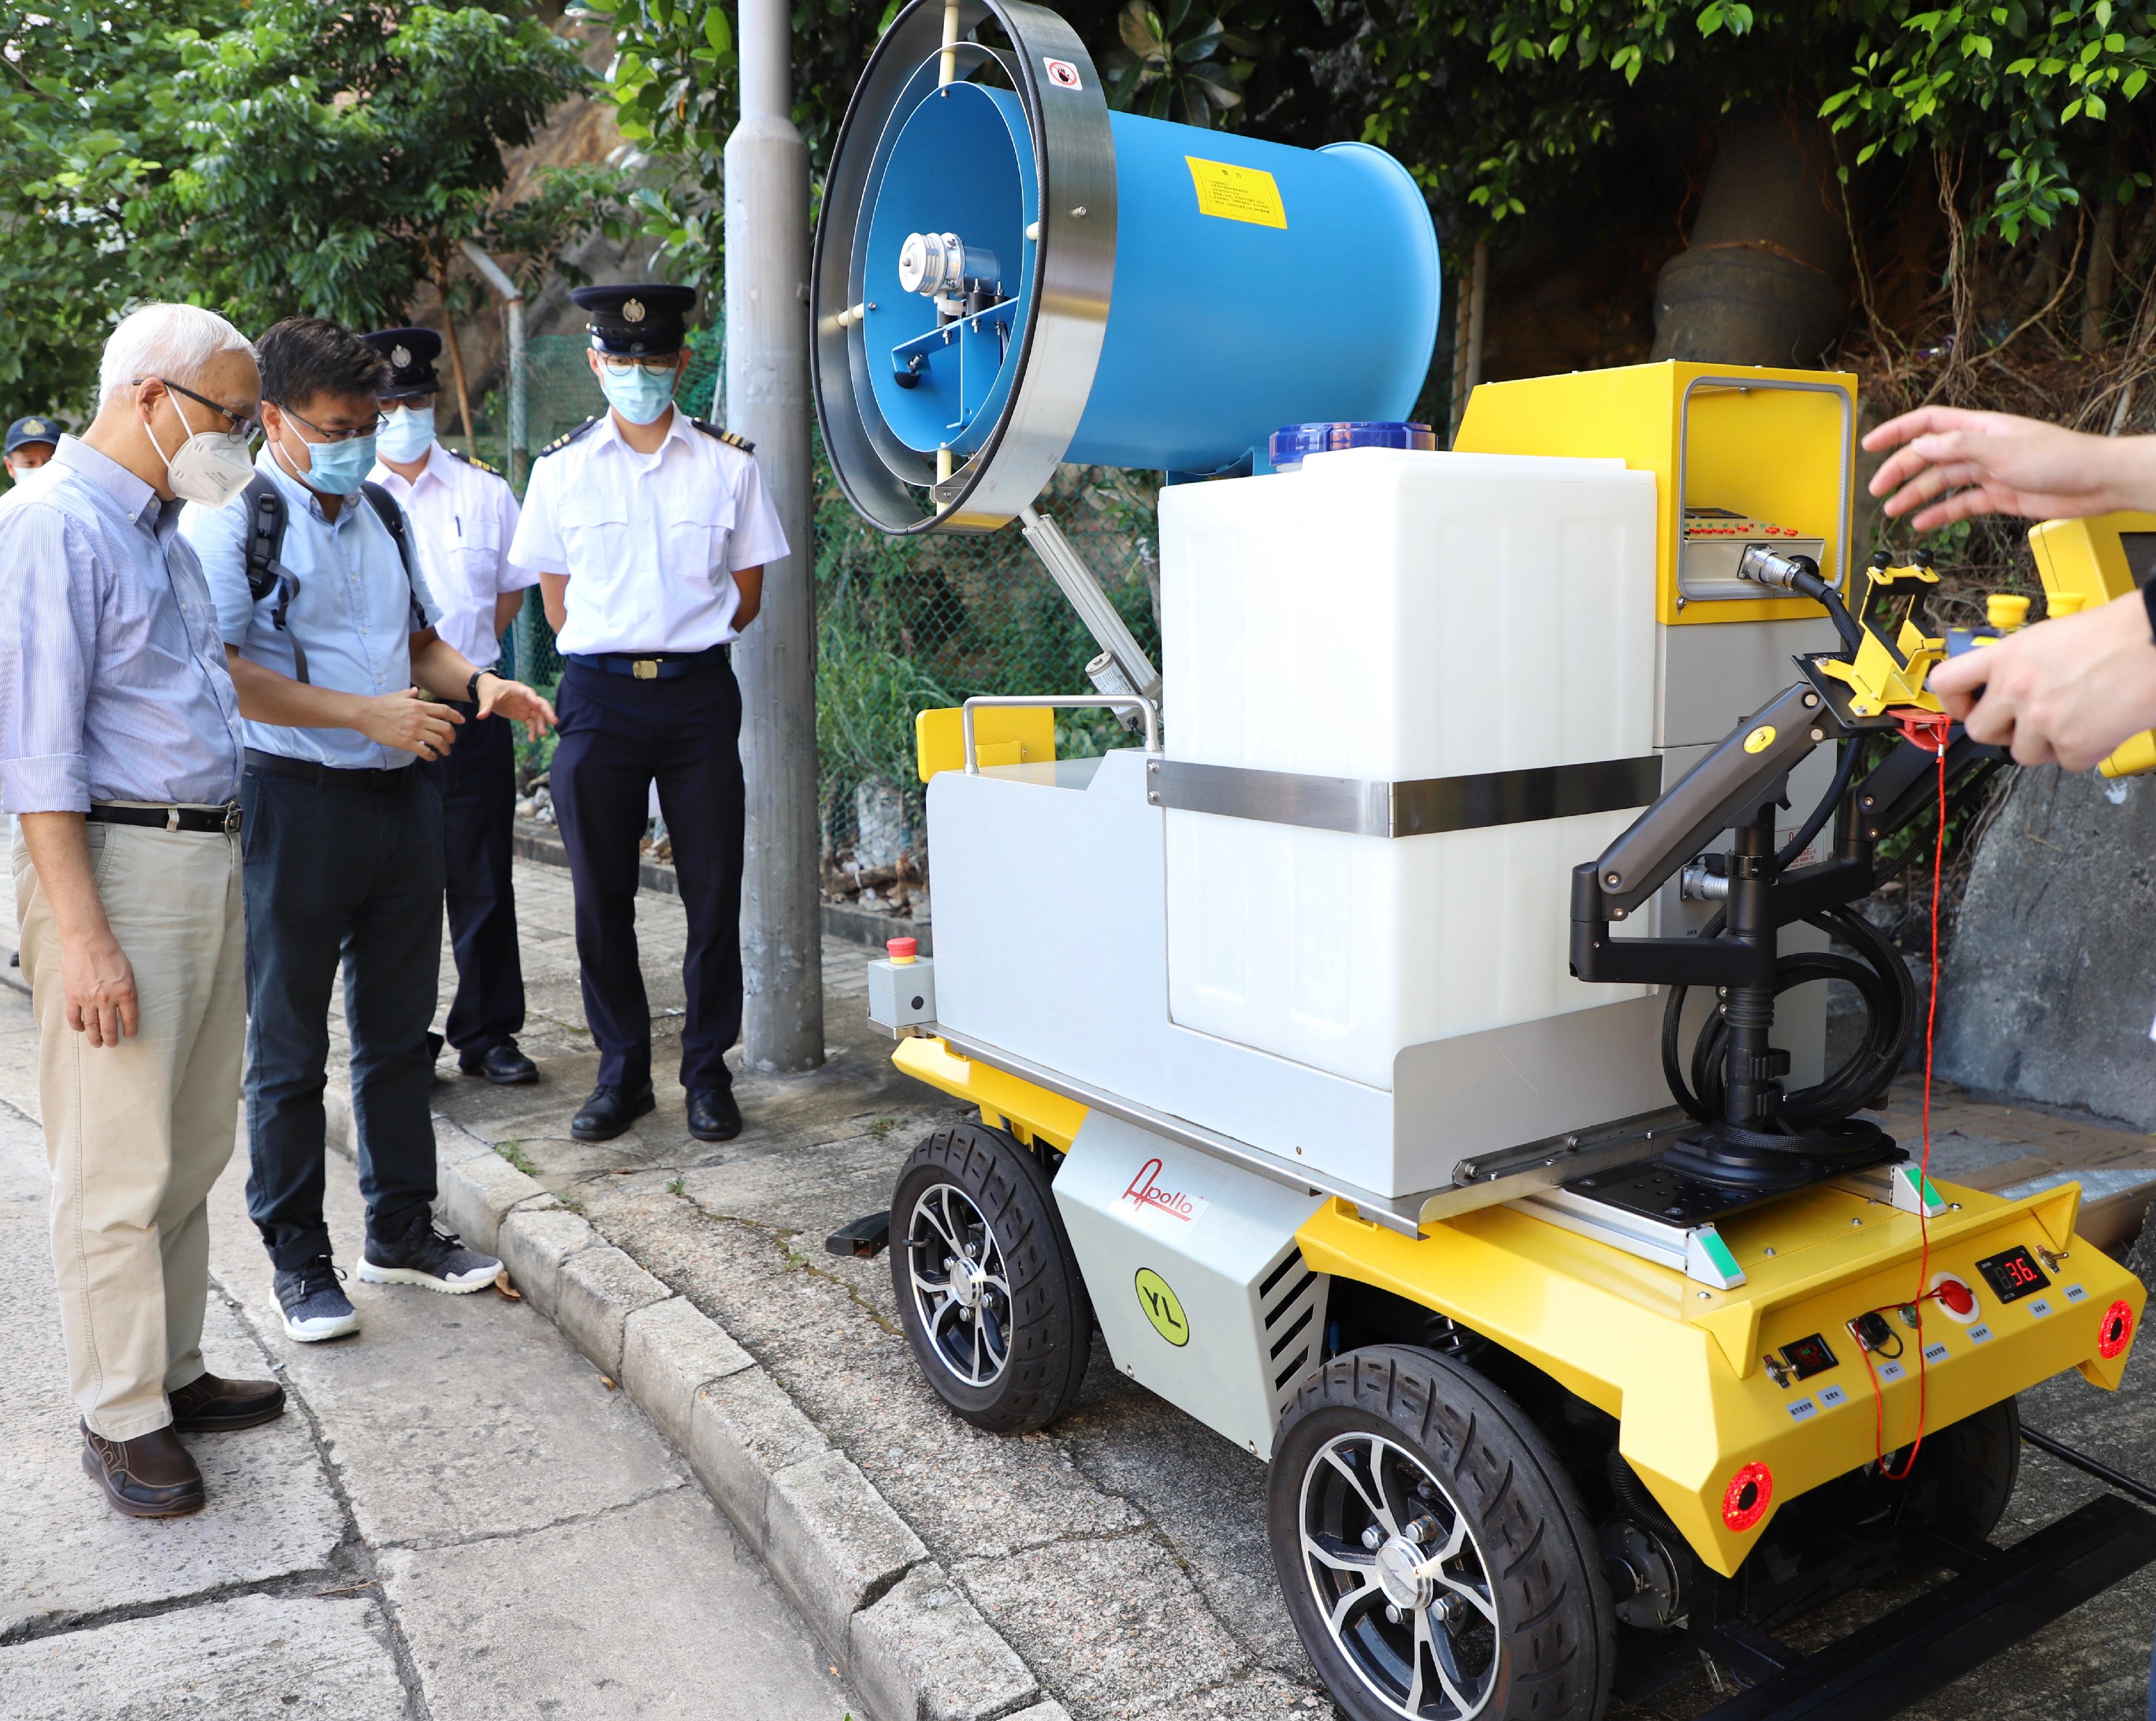 The Secretary for Environment and Ecology, Mr Tse Chin-wan, today (August 7) inspected the Food and Environmental Hygiene Department (FEHD)'s anti-mosquito measures at the hillside near Princess Margaret Hospital, Kwai Chung. Photo shows Mr Tse (left) being briefed on the operation of a large robotics ultra-low volume fogger for spraying pesticides. 